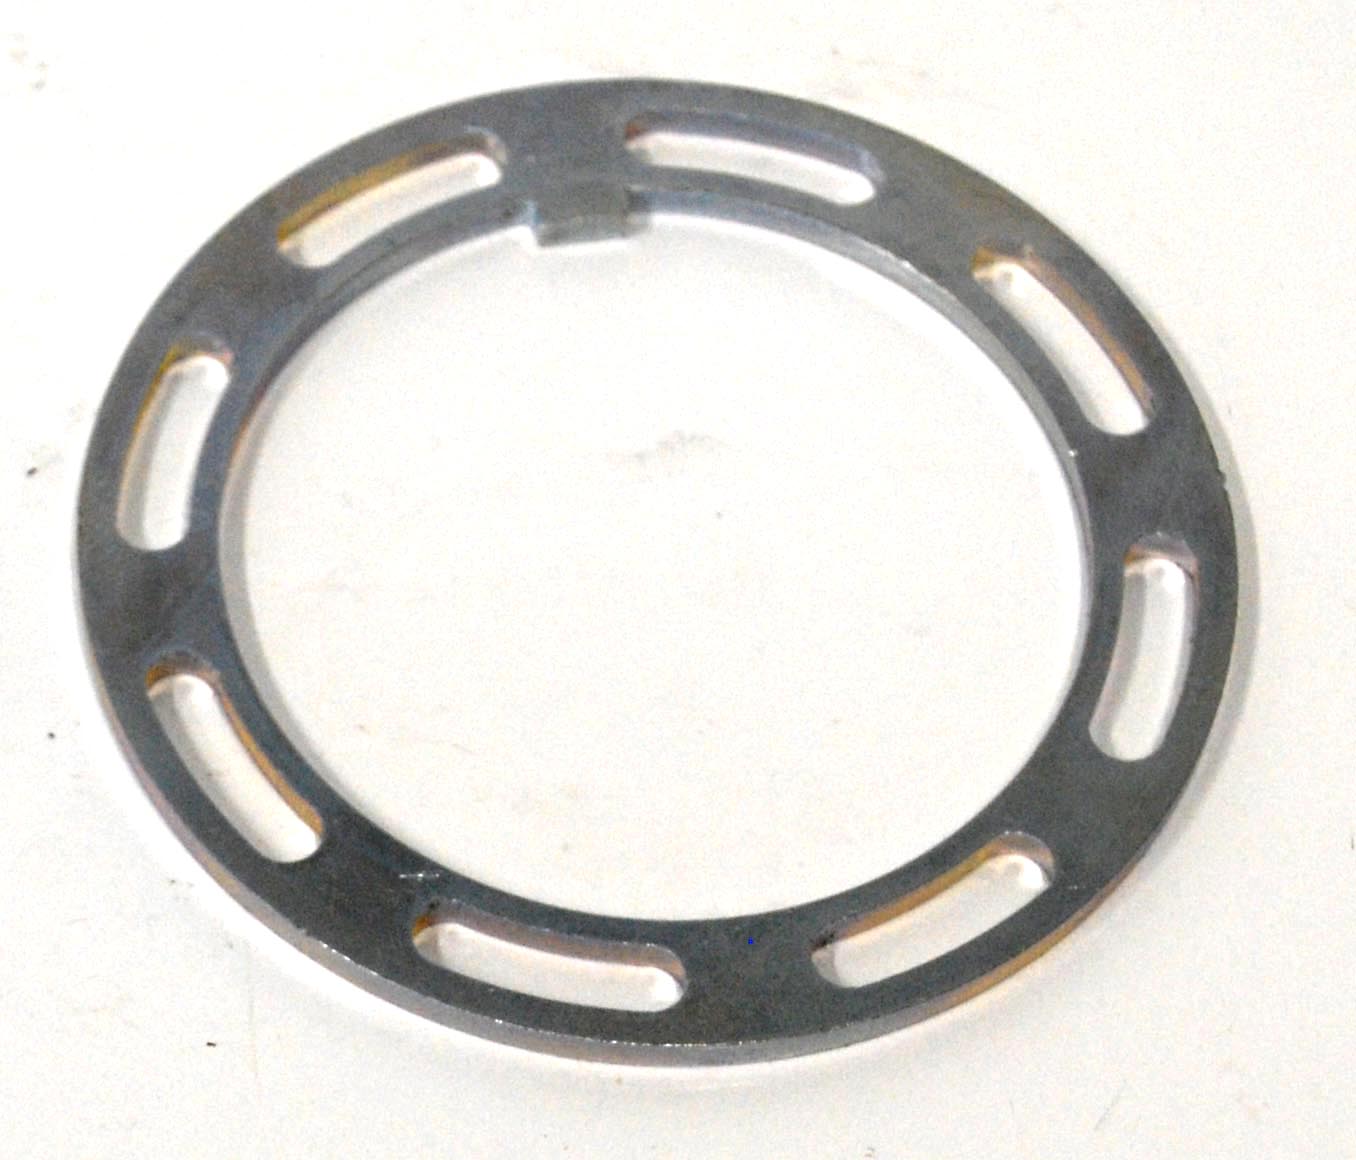 Part # 4277 GN Slotted Lock Washer